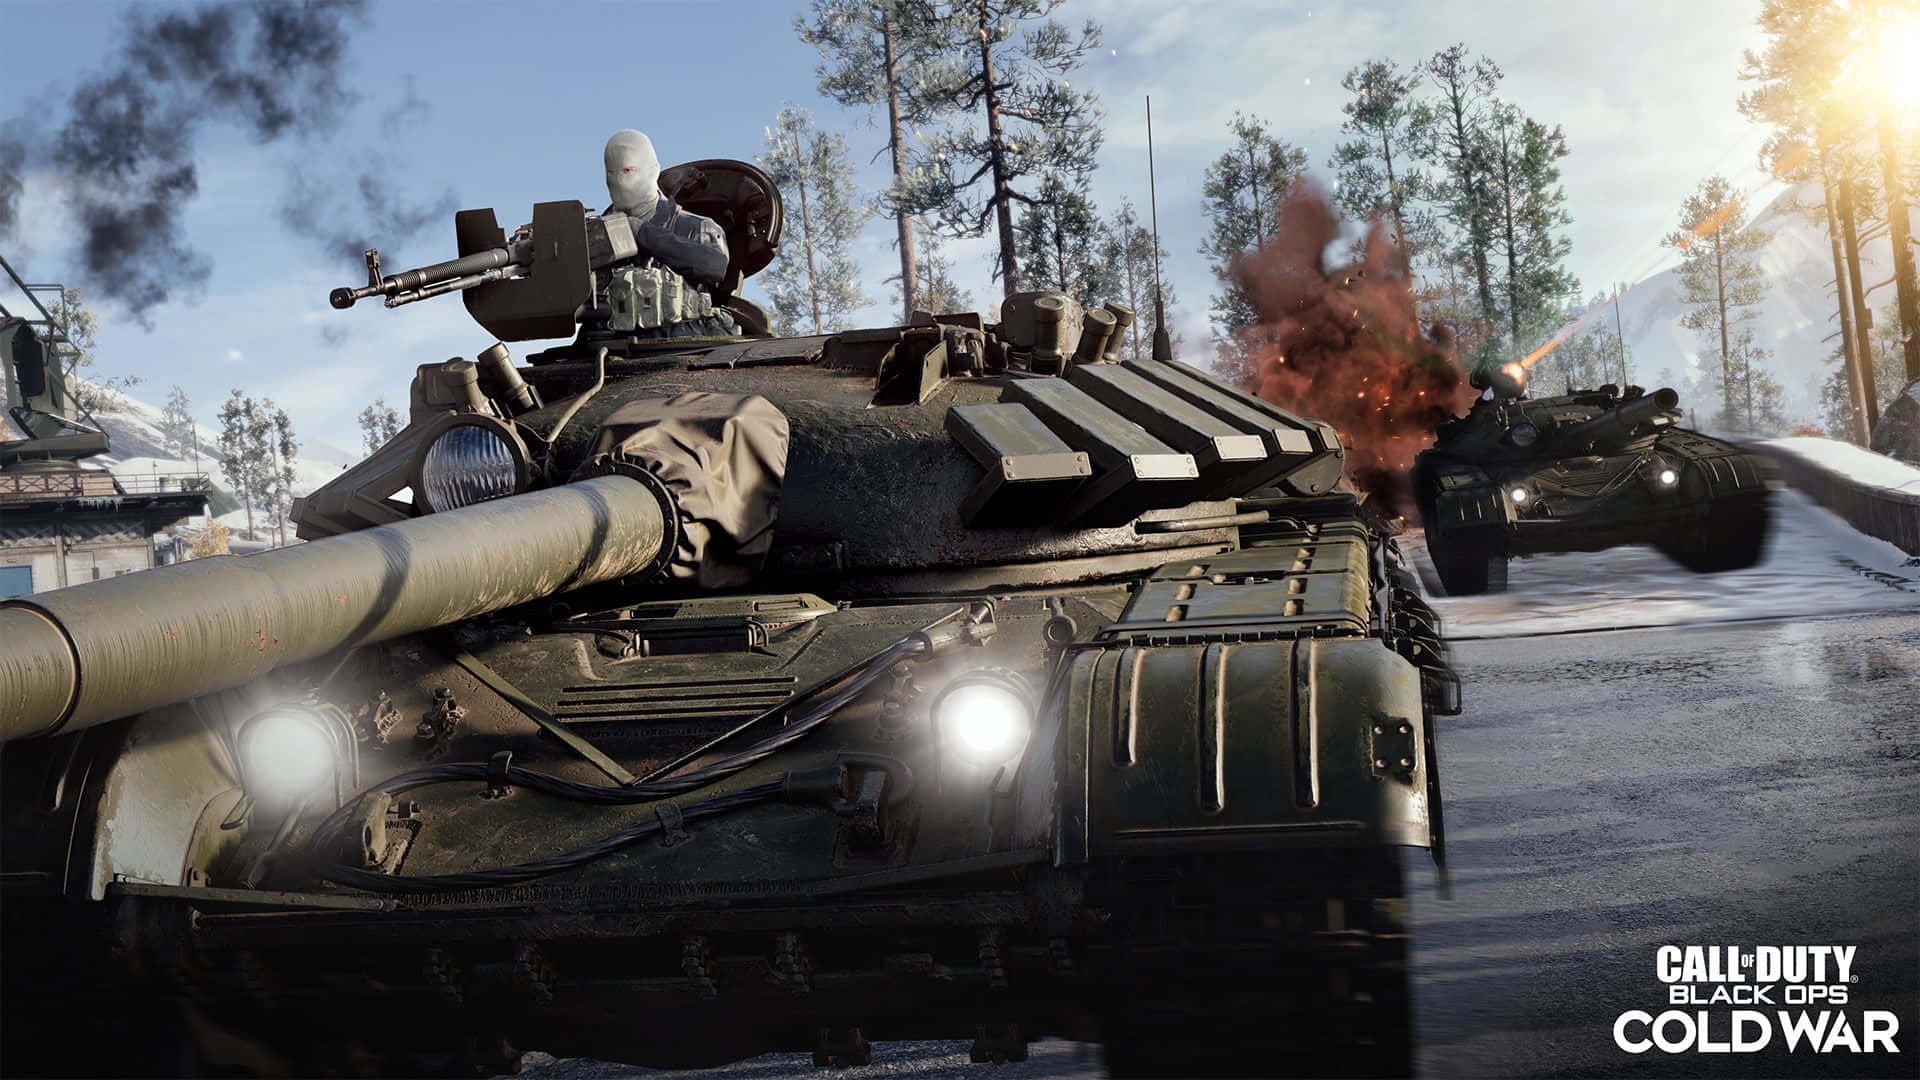 Explosive Call of Duty Vehicles in Action Wallpaper